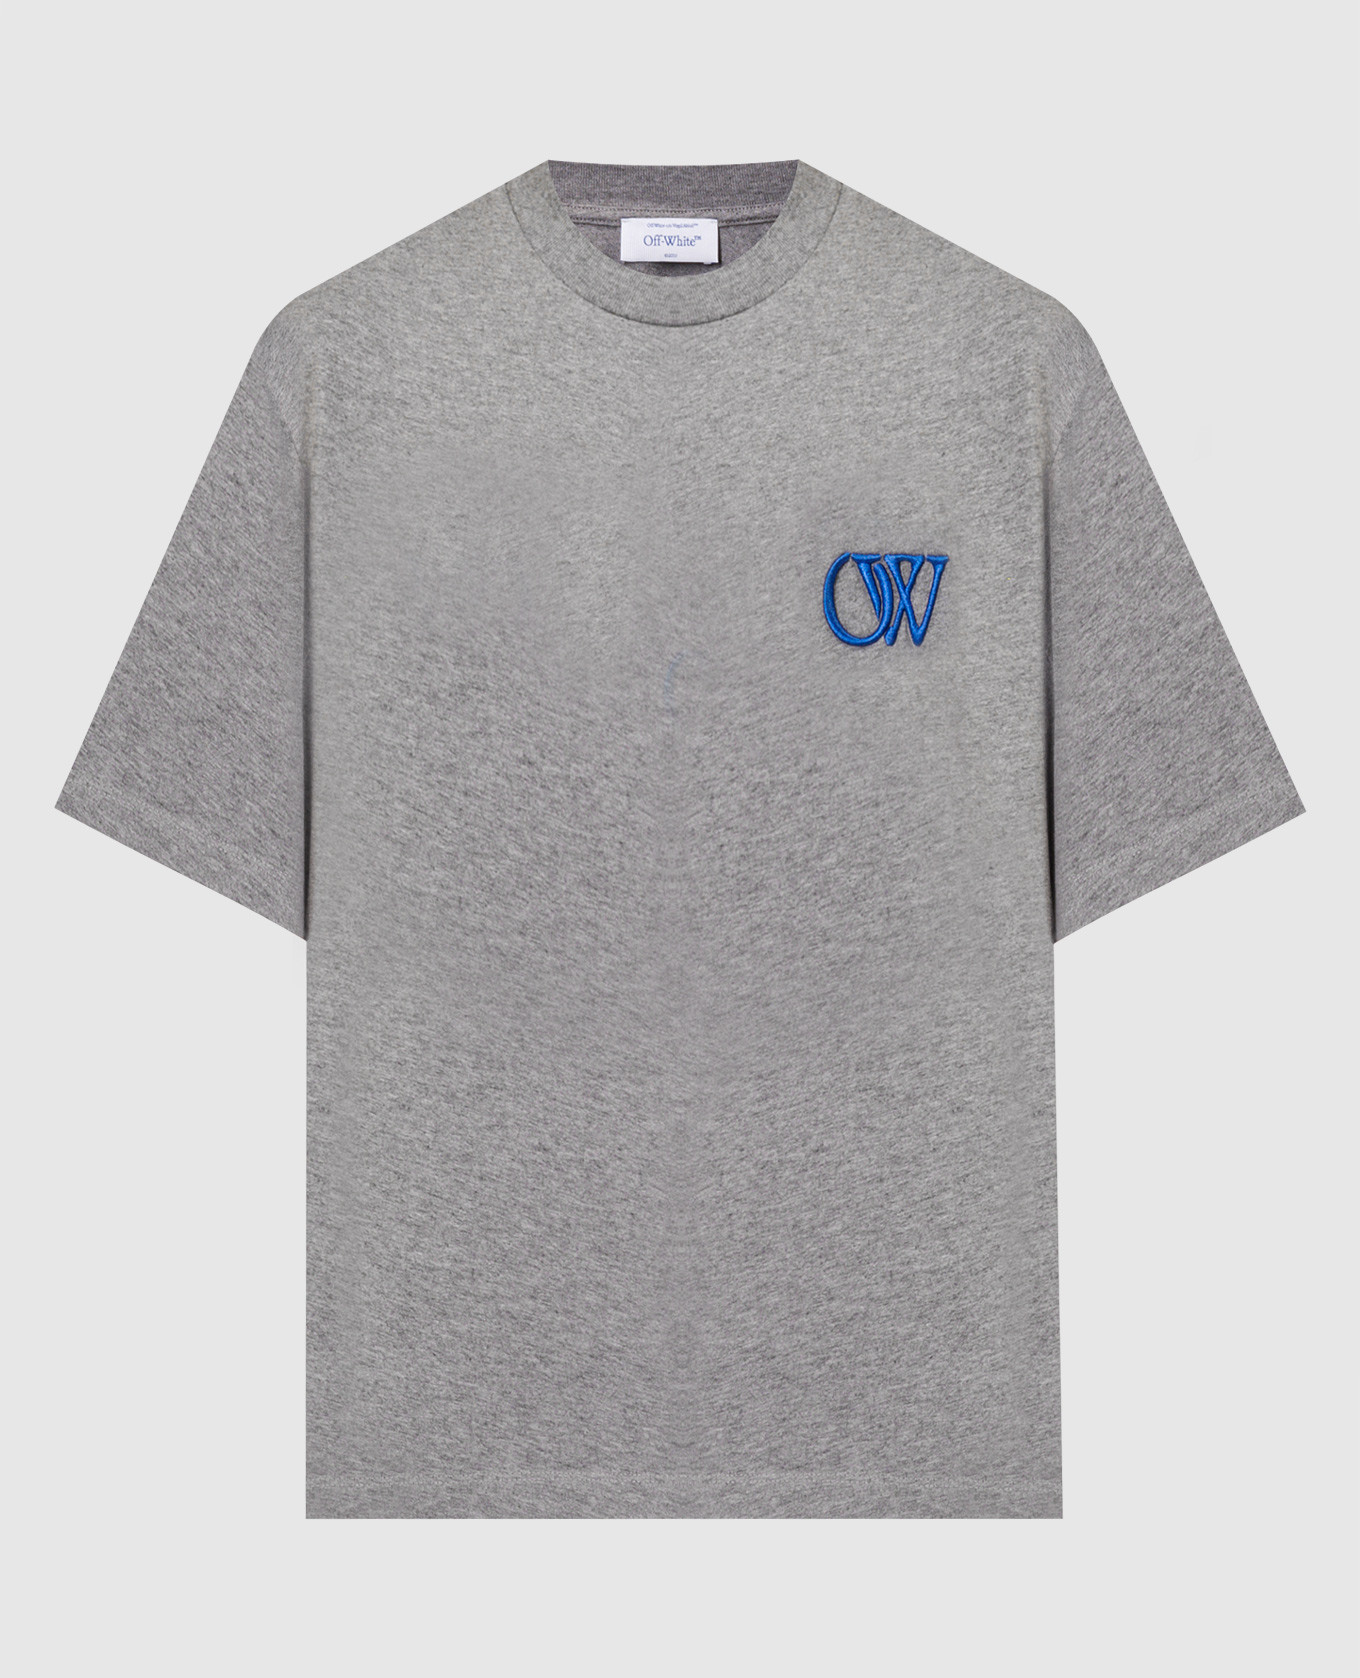 Gray melange T-shirt with OW logo embroidery